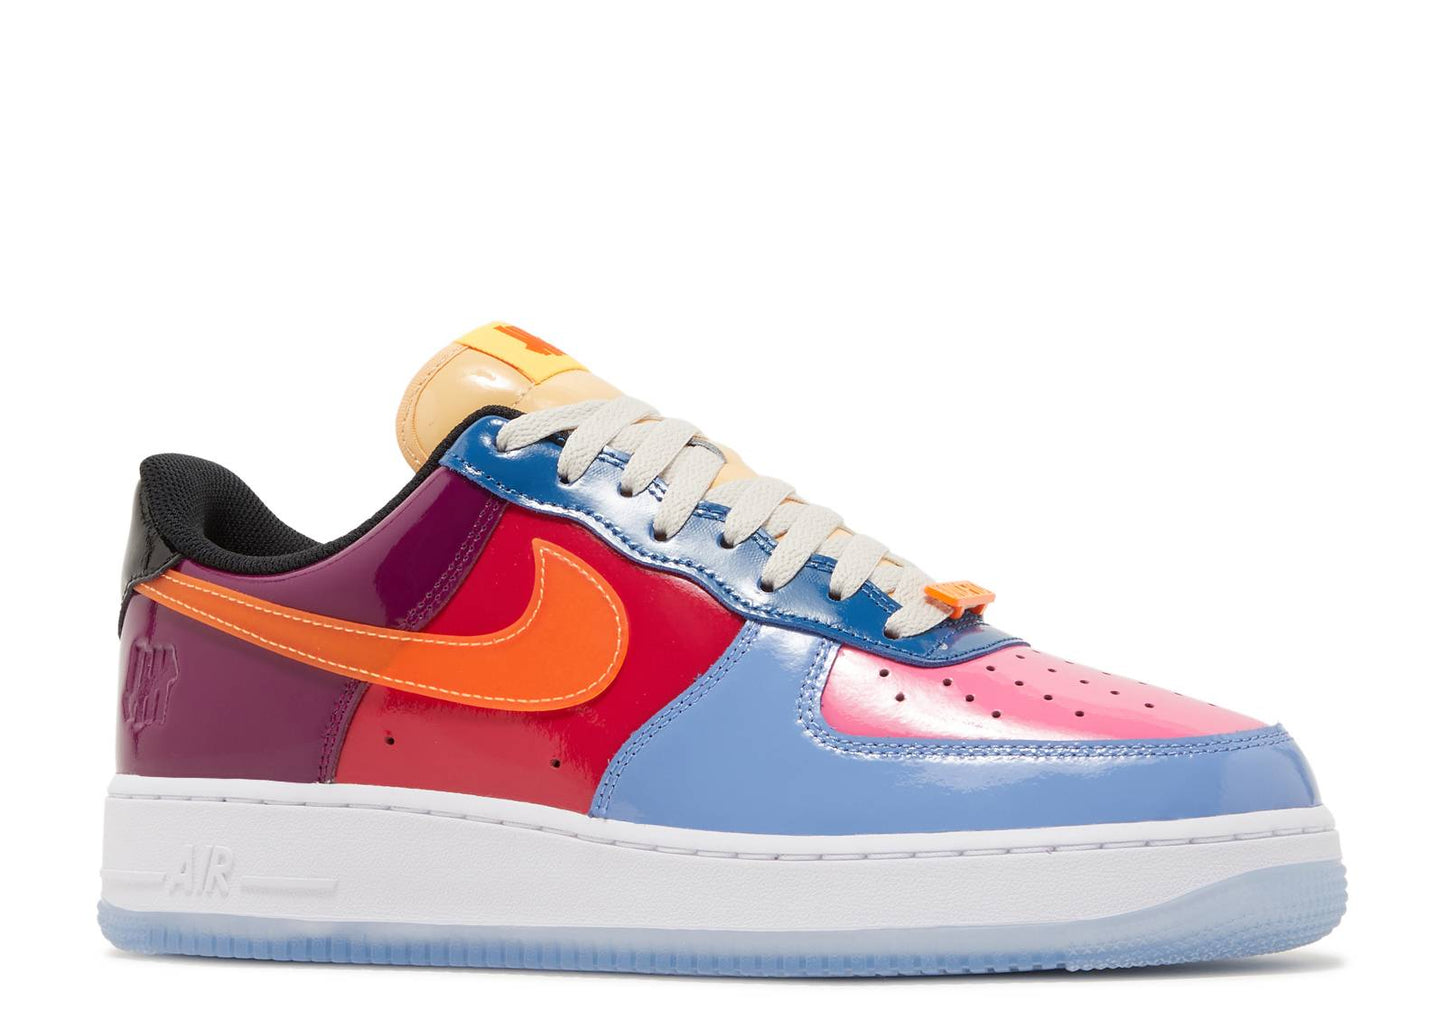 Undefeated x Nike Air Force 1 Low "Total Orange"